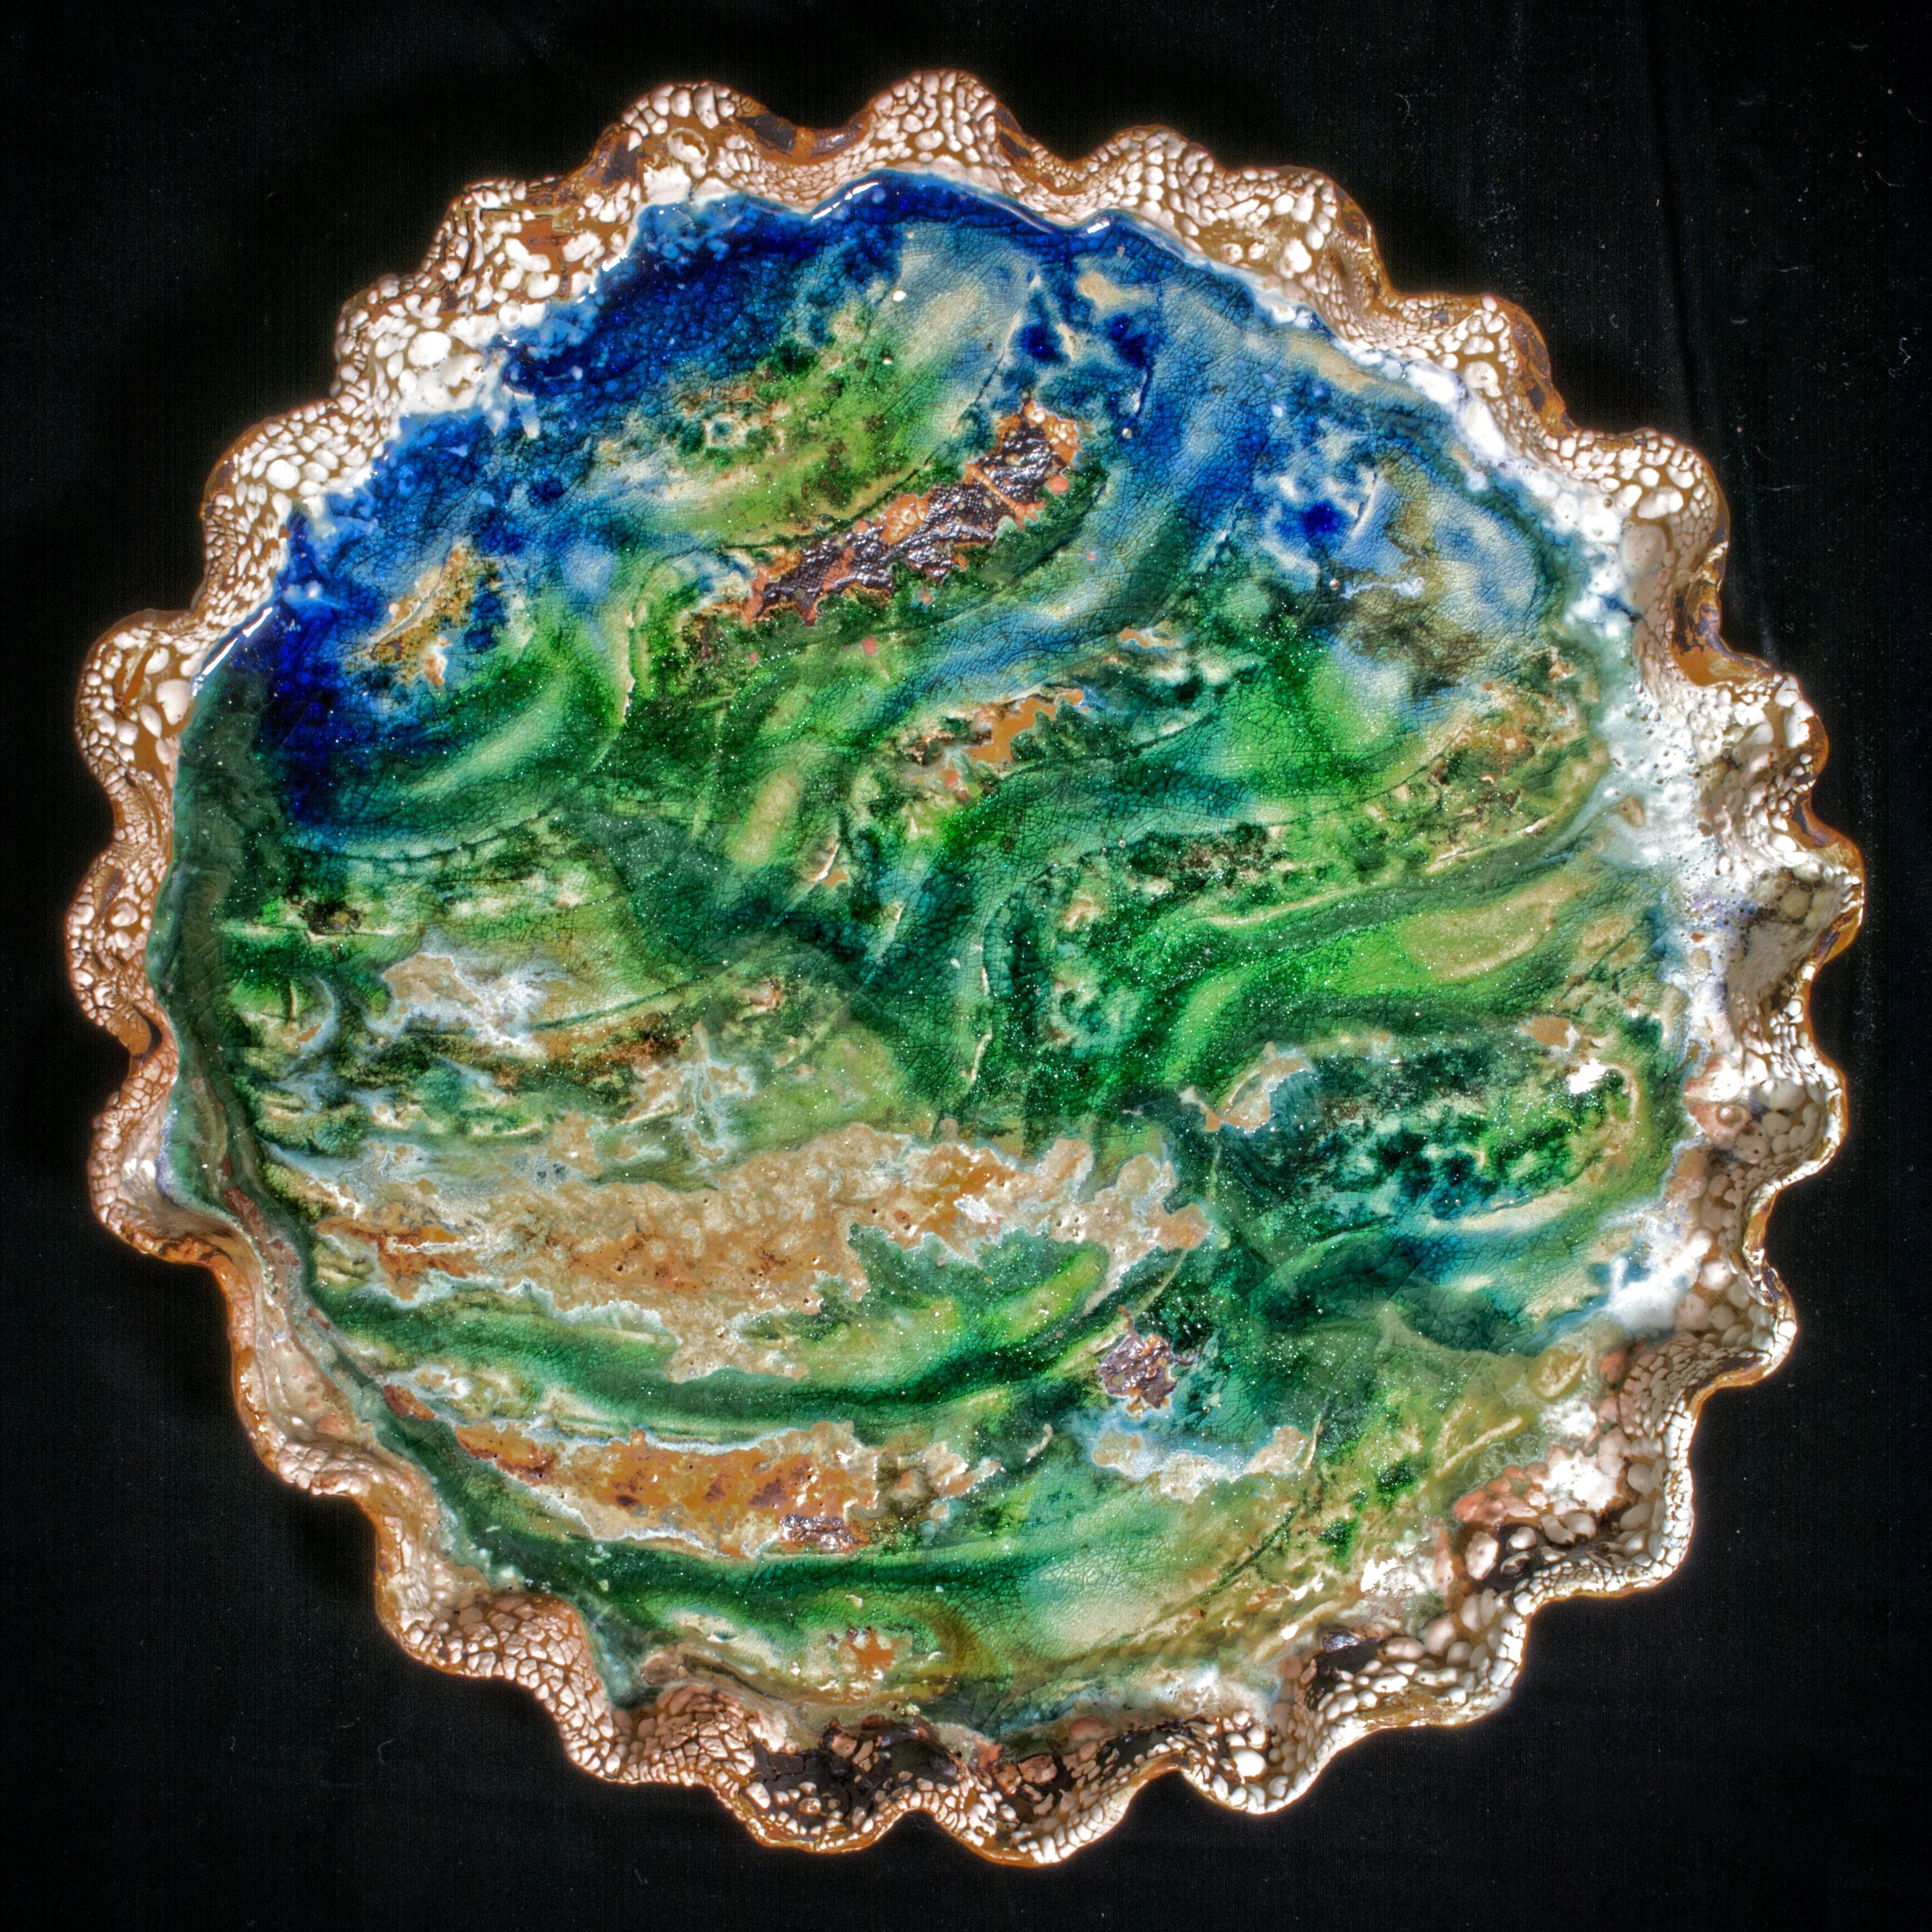 "Great Lake", textured ceramic in bright blues, greens and cream - Sculpture by Allan Drossman